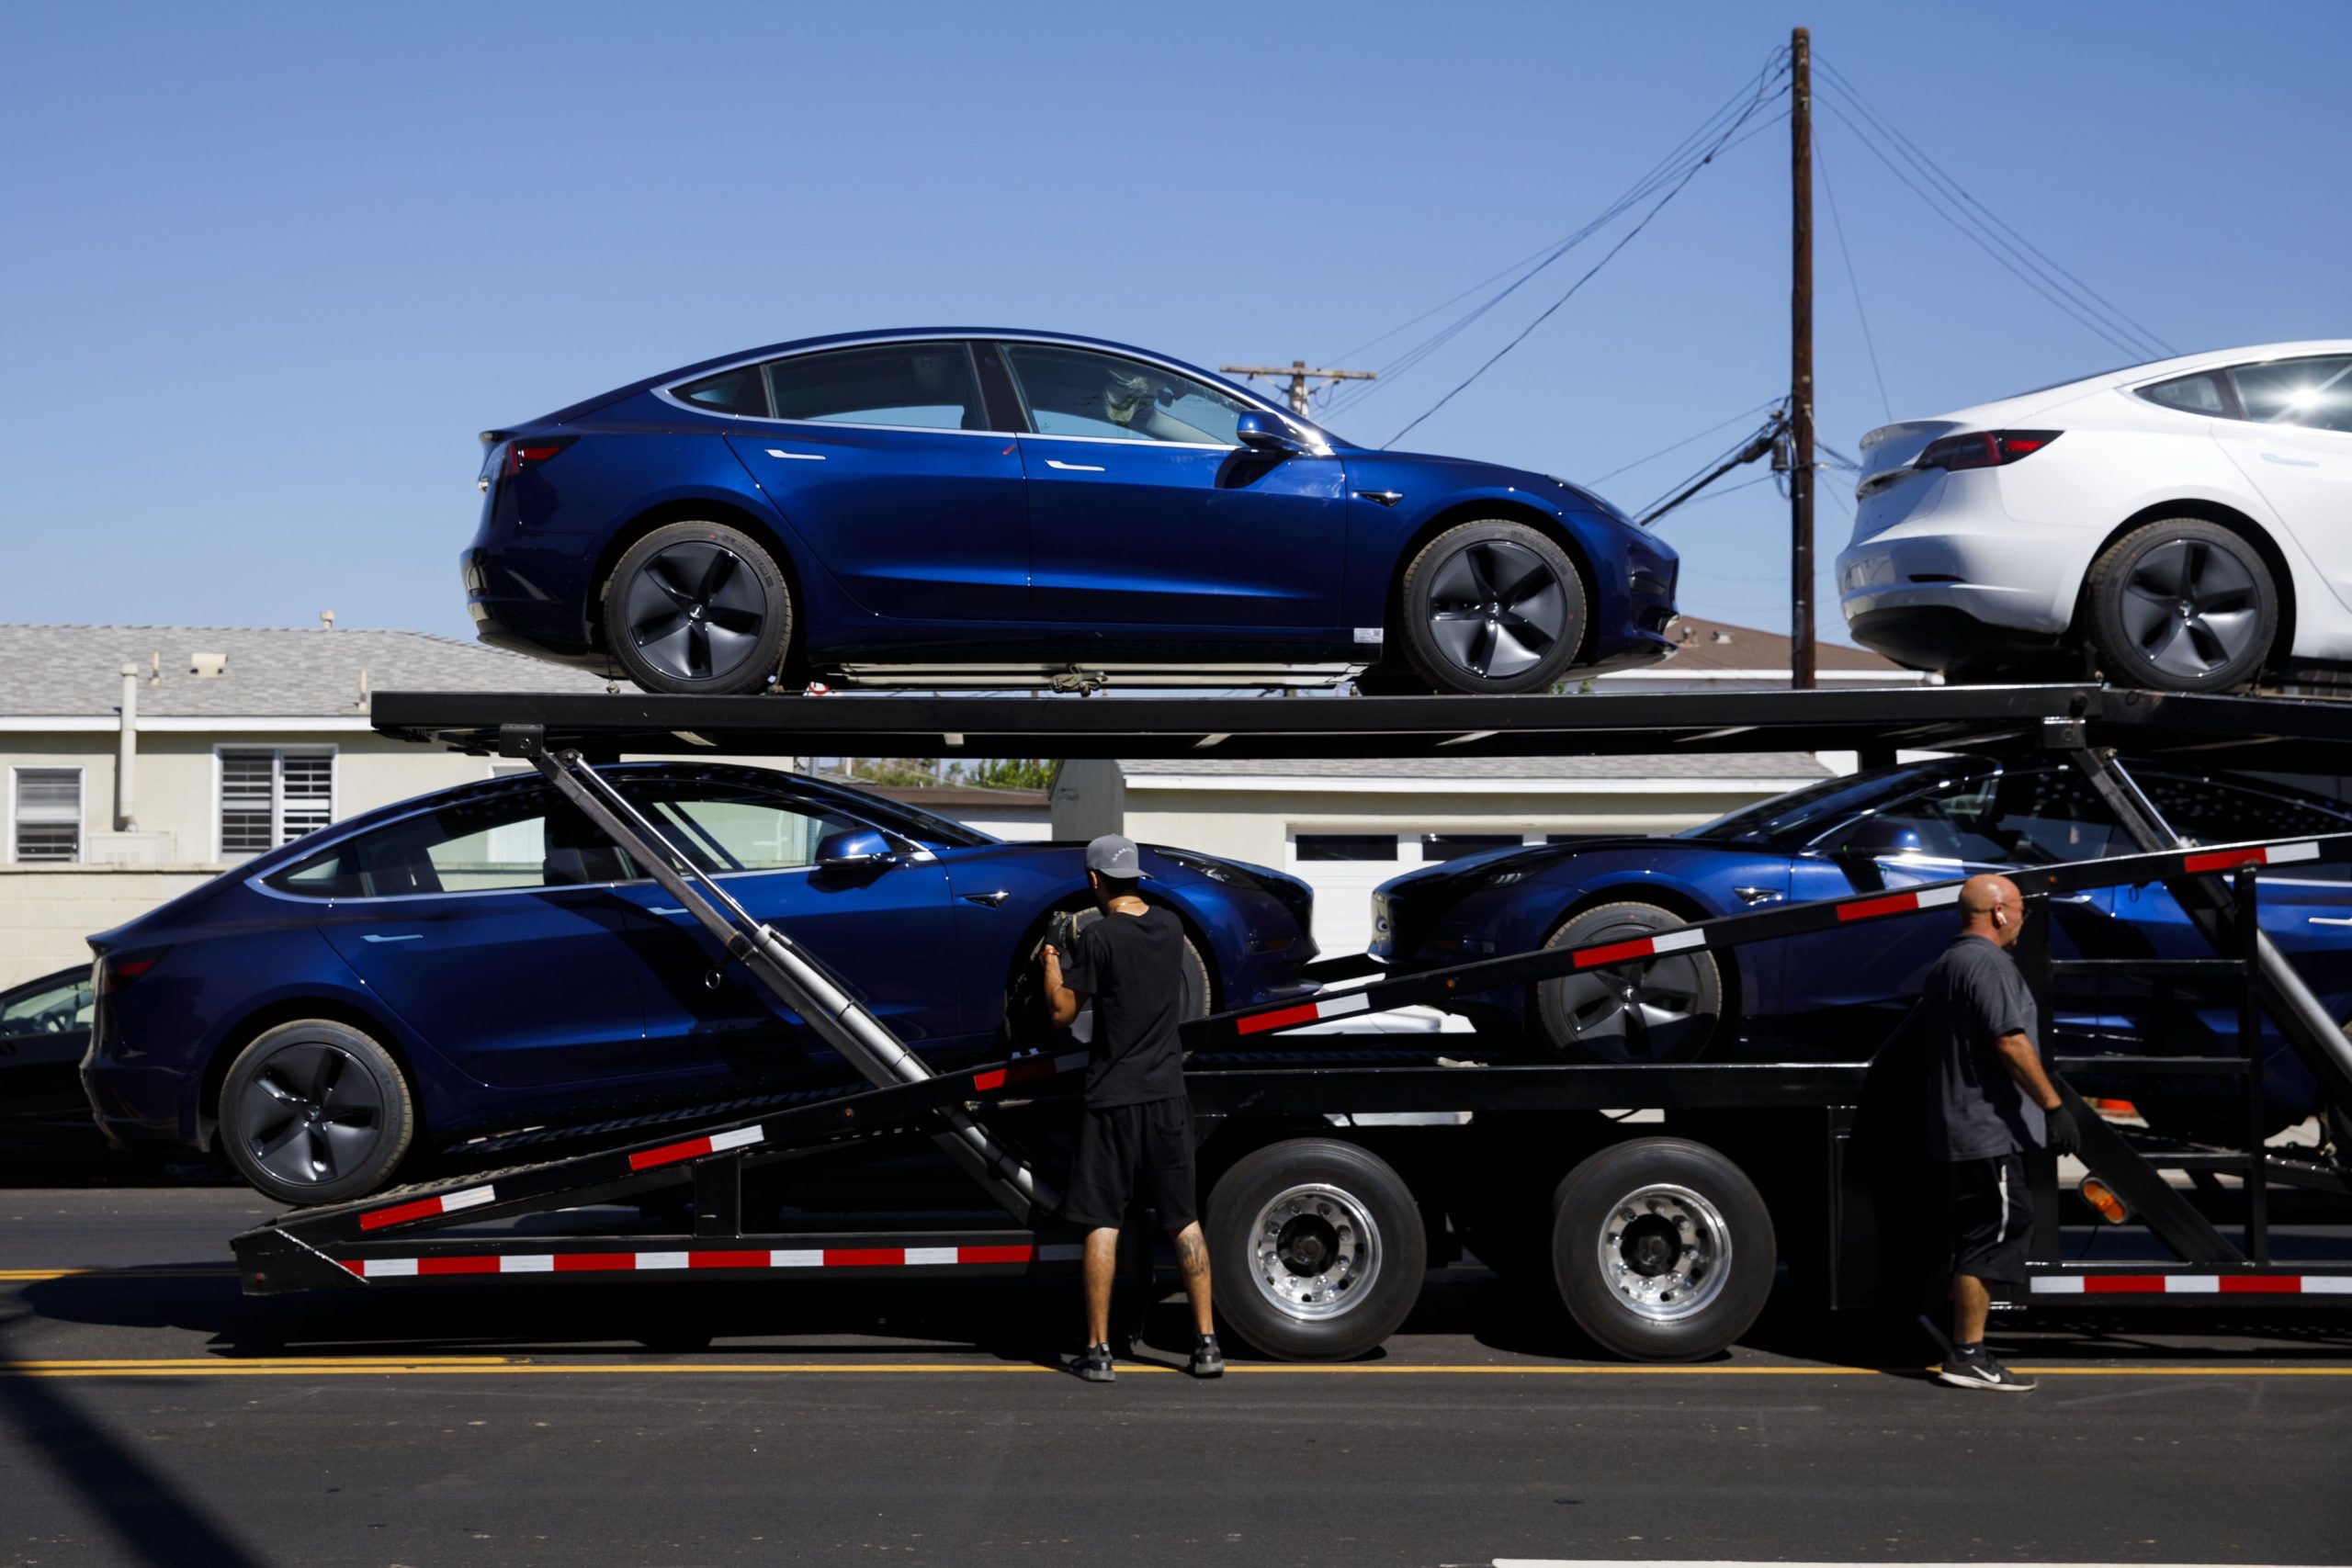 Tesla Inc. Model 3 electric vehicles are unloaded from a car carrier at the company's delivery center in Marina Del Rey, California, U.S., on Saturday, Sept. 29, 2018. Photographer: Patrick T. Fallon/Bloomberg